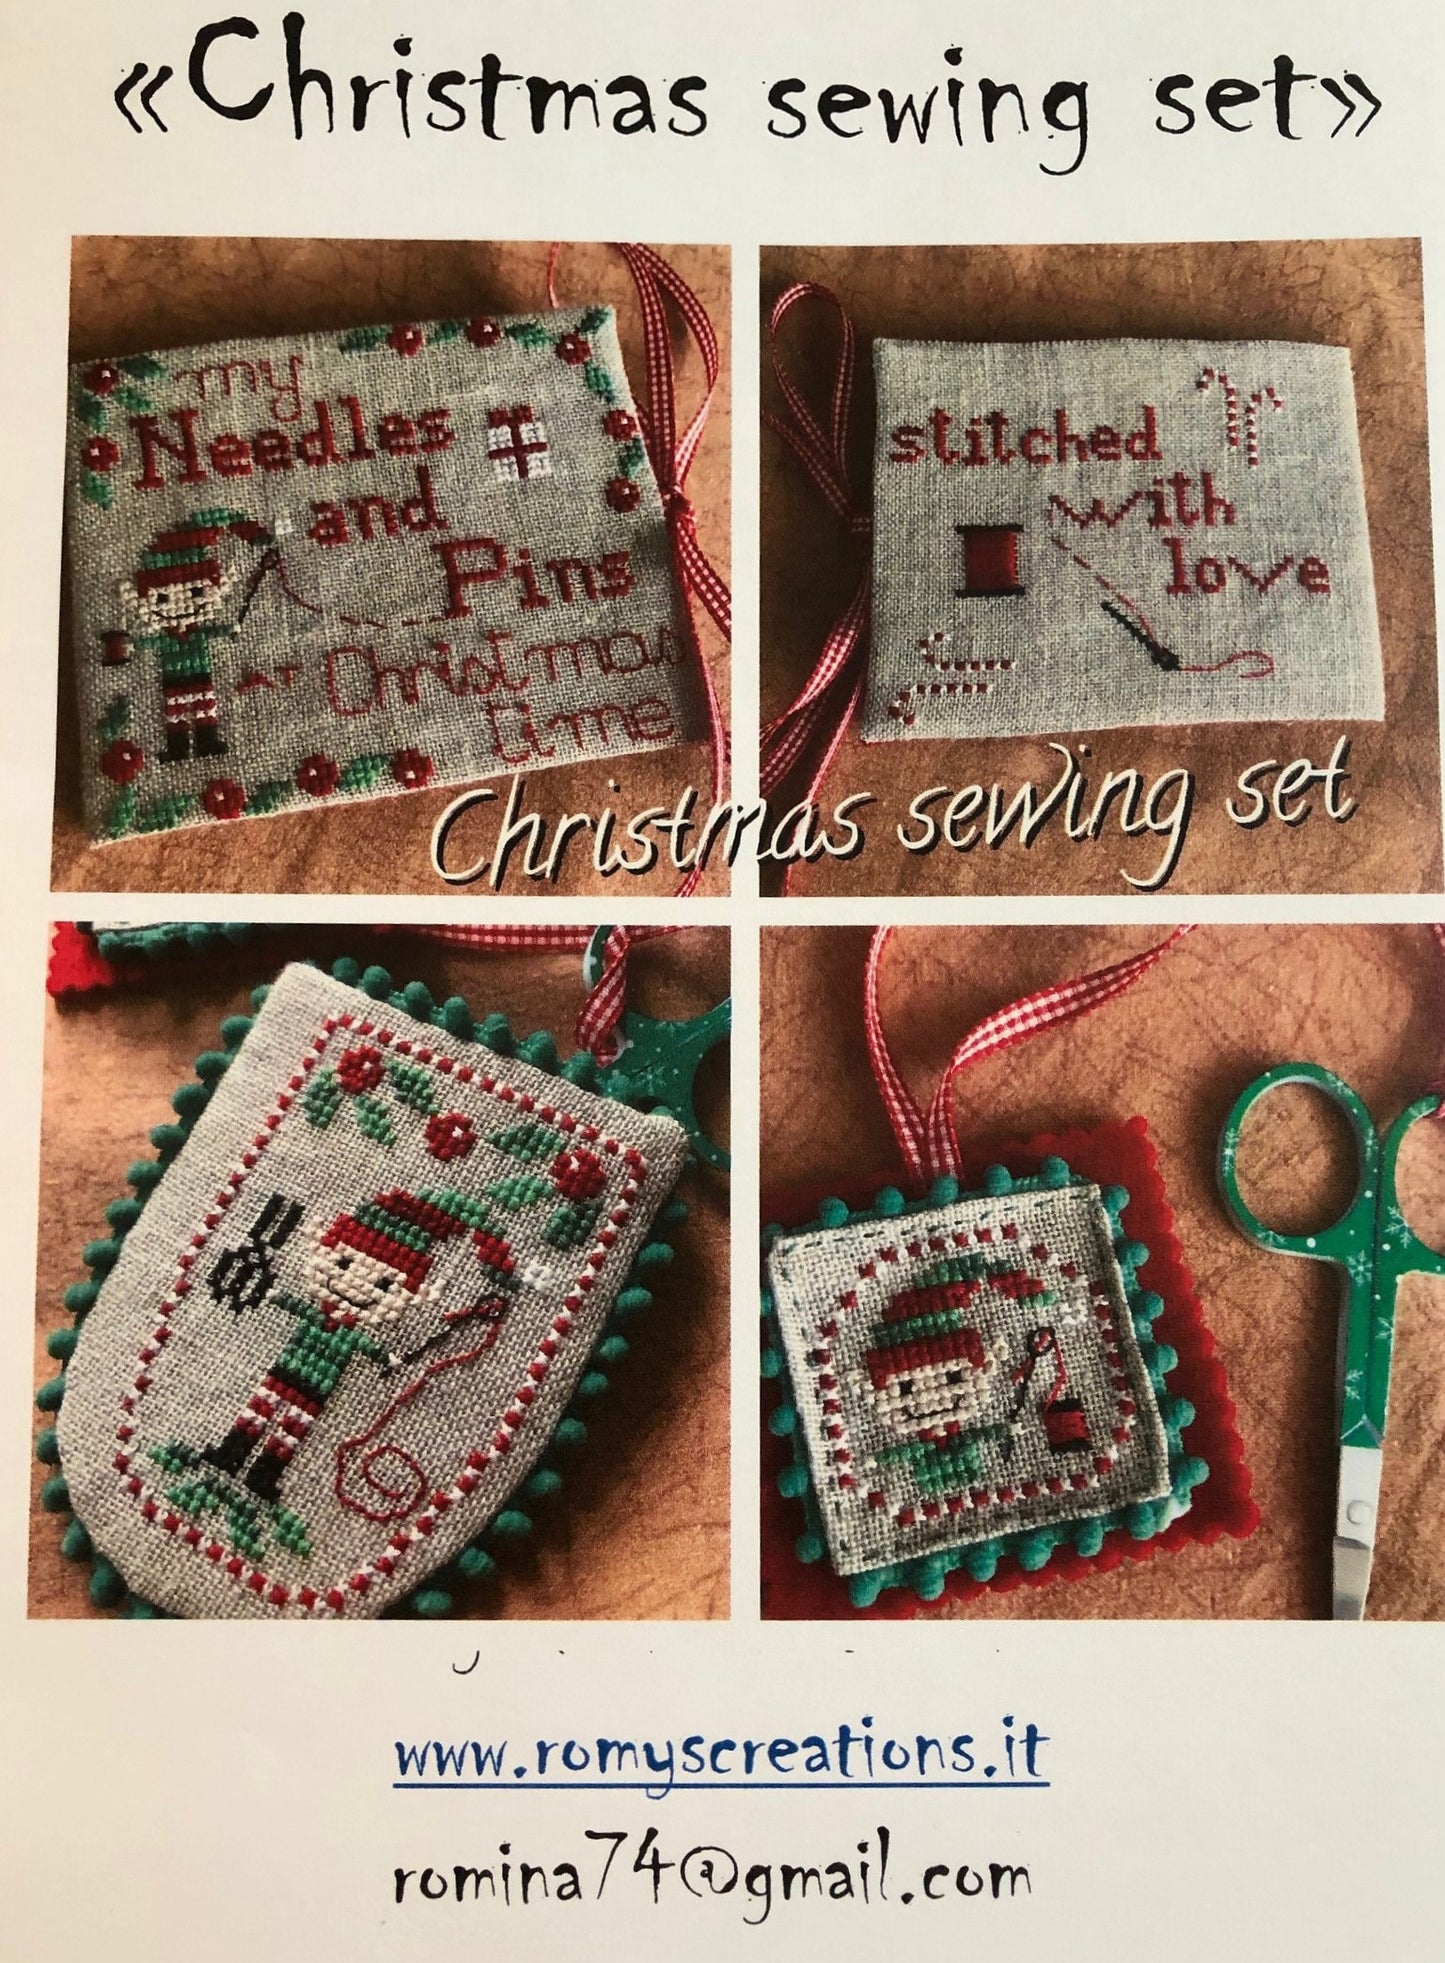 Romy's Creations - Christmas Sewing Set